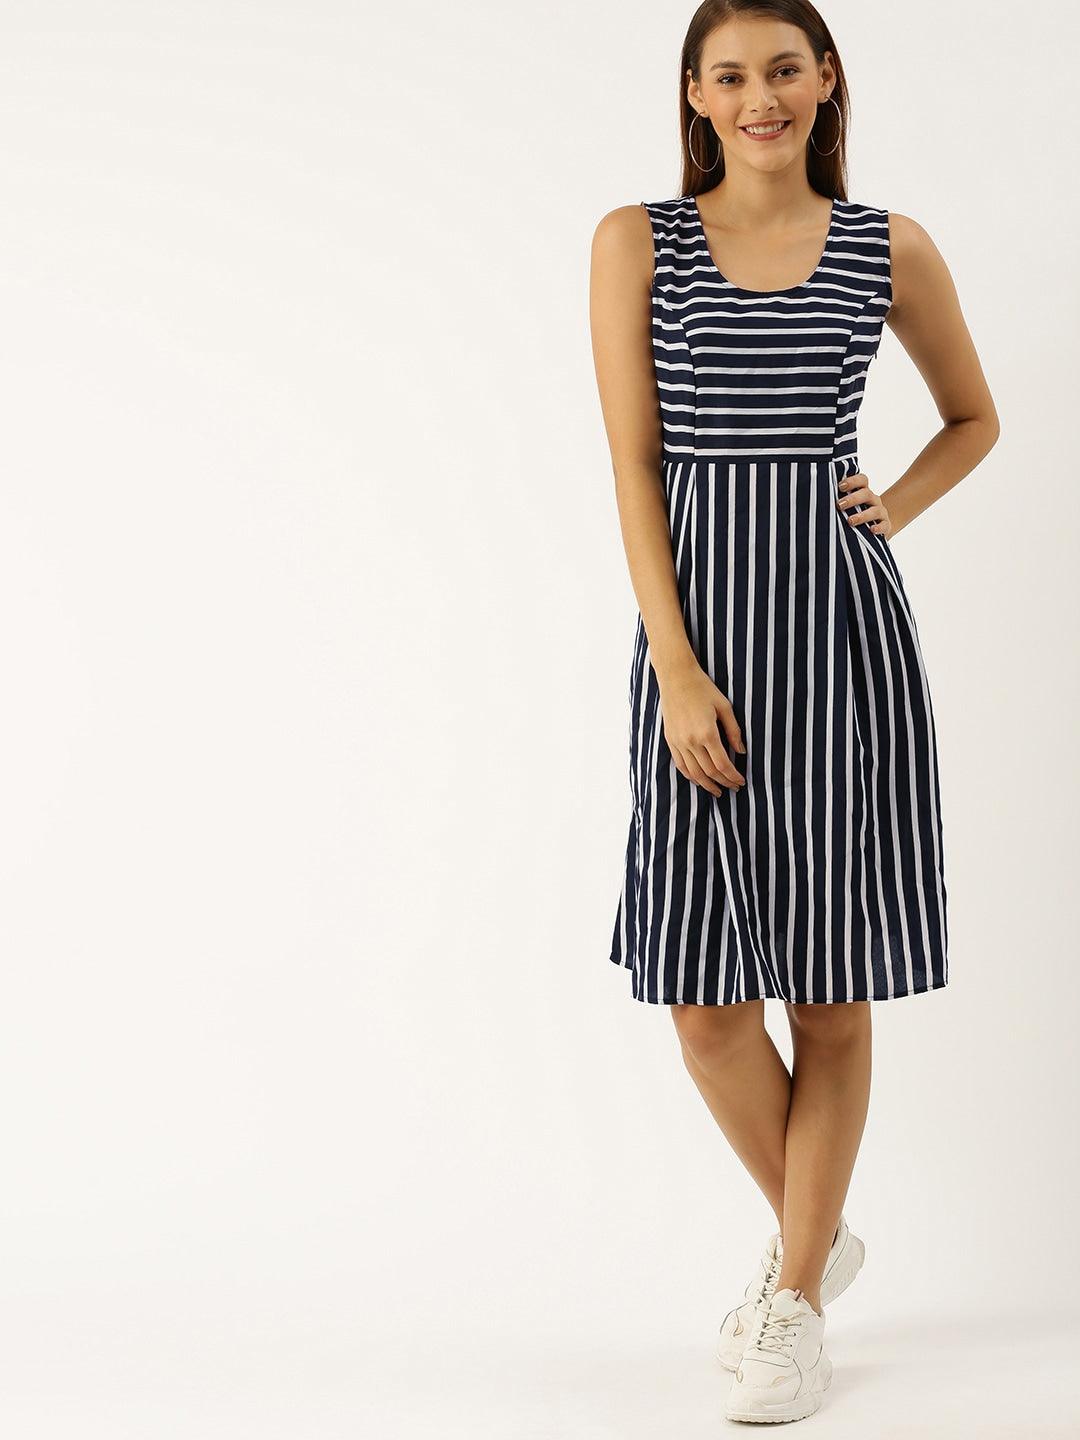 Qurvii Women Navy Blue and White Striped Fit and Flare Dress - Qurvii India